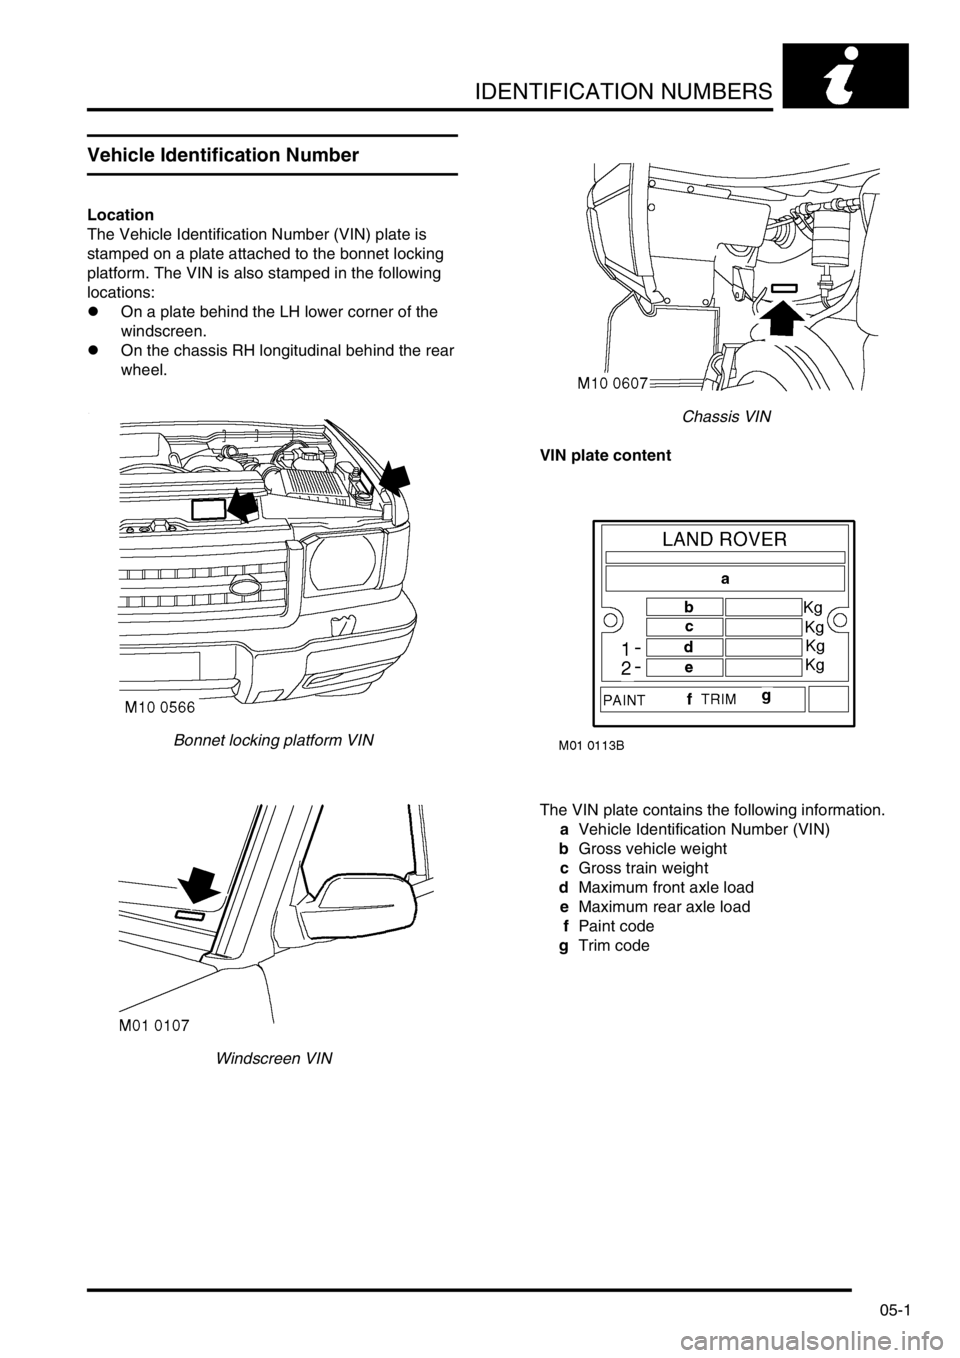 LAND ROVER DISCOVERY 2002  Workshop Manual IDENTIFICATION NUMBERS
05-1
IDE NTIFICATION NUMBERS
Vehicle Identification Number
Location
The Vehicle Identification Number (VIN) plate is 
stamped on a plate attached to the bonnet locking 
platform